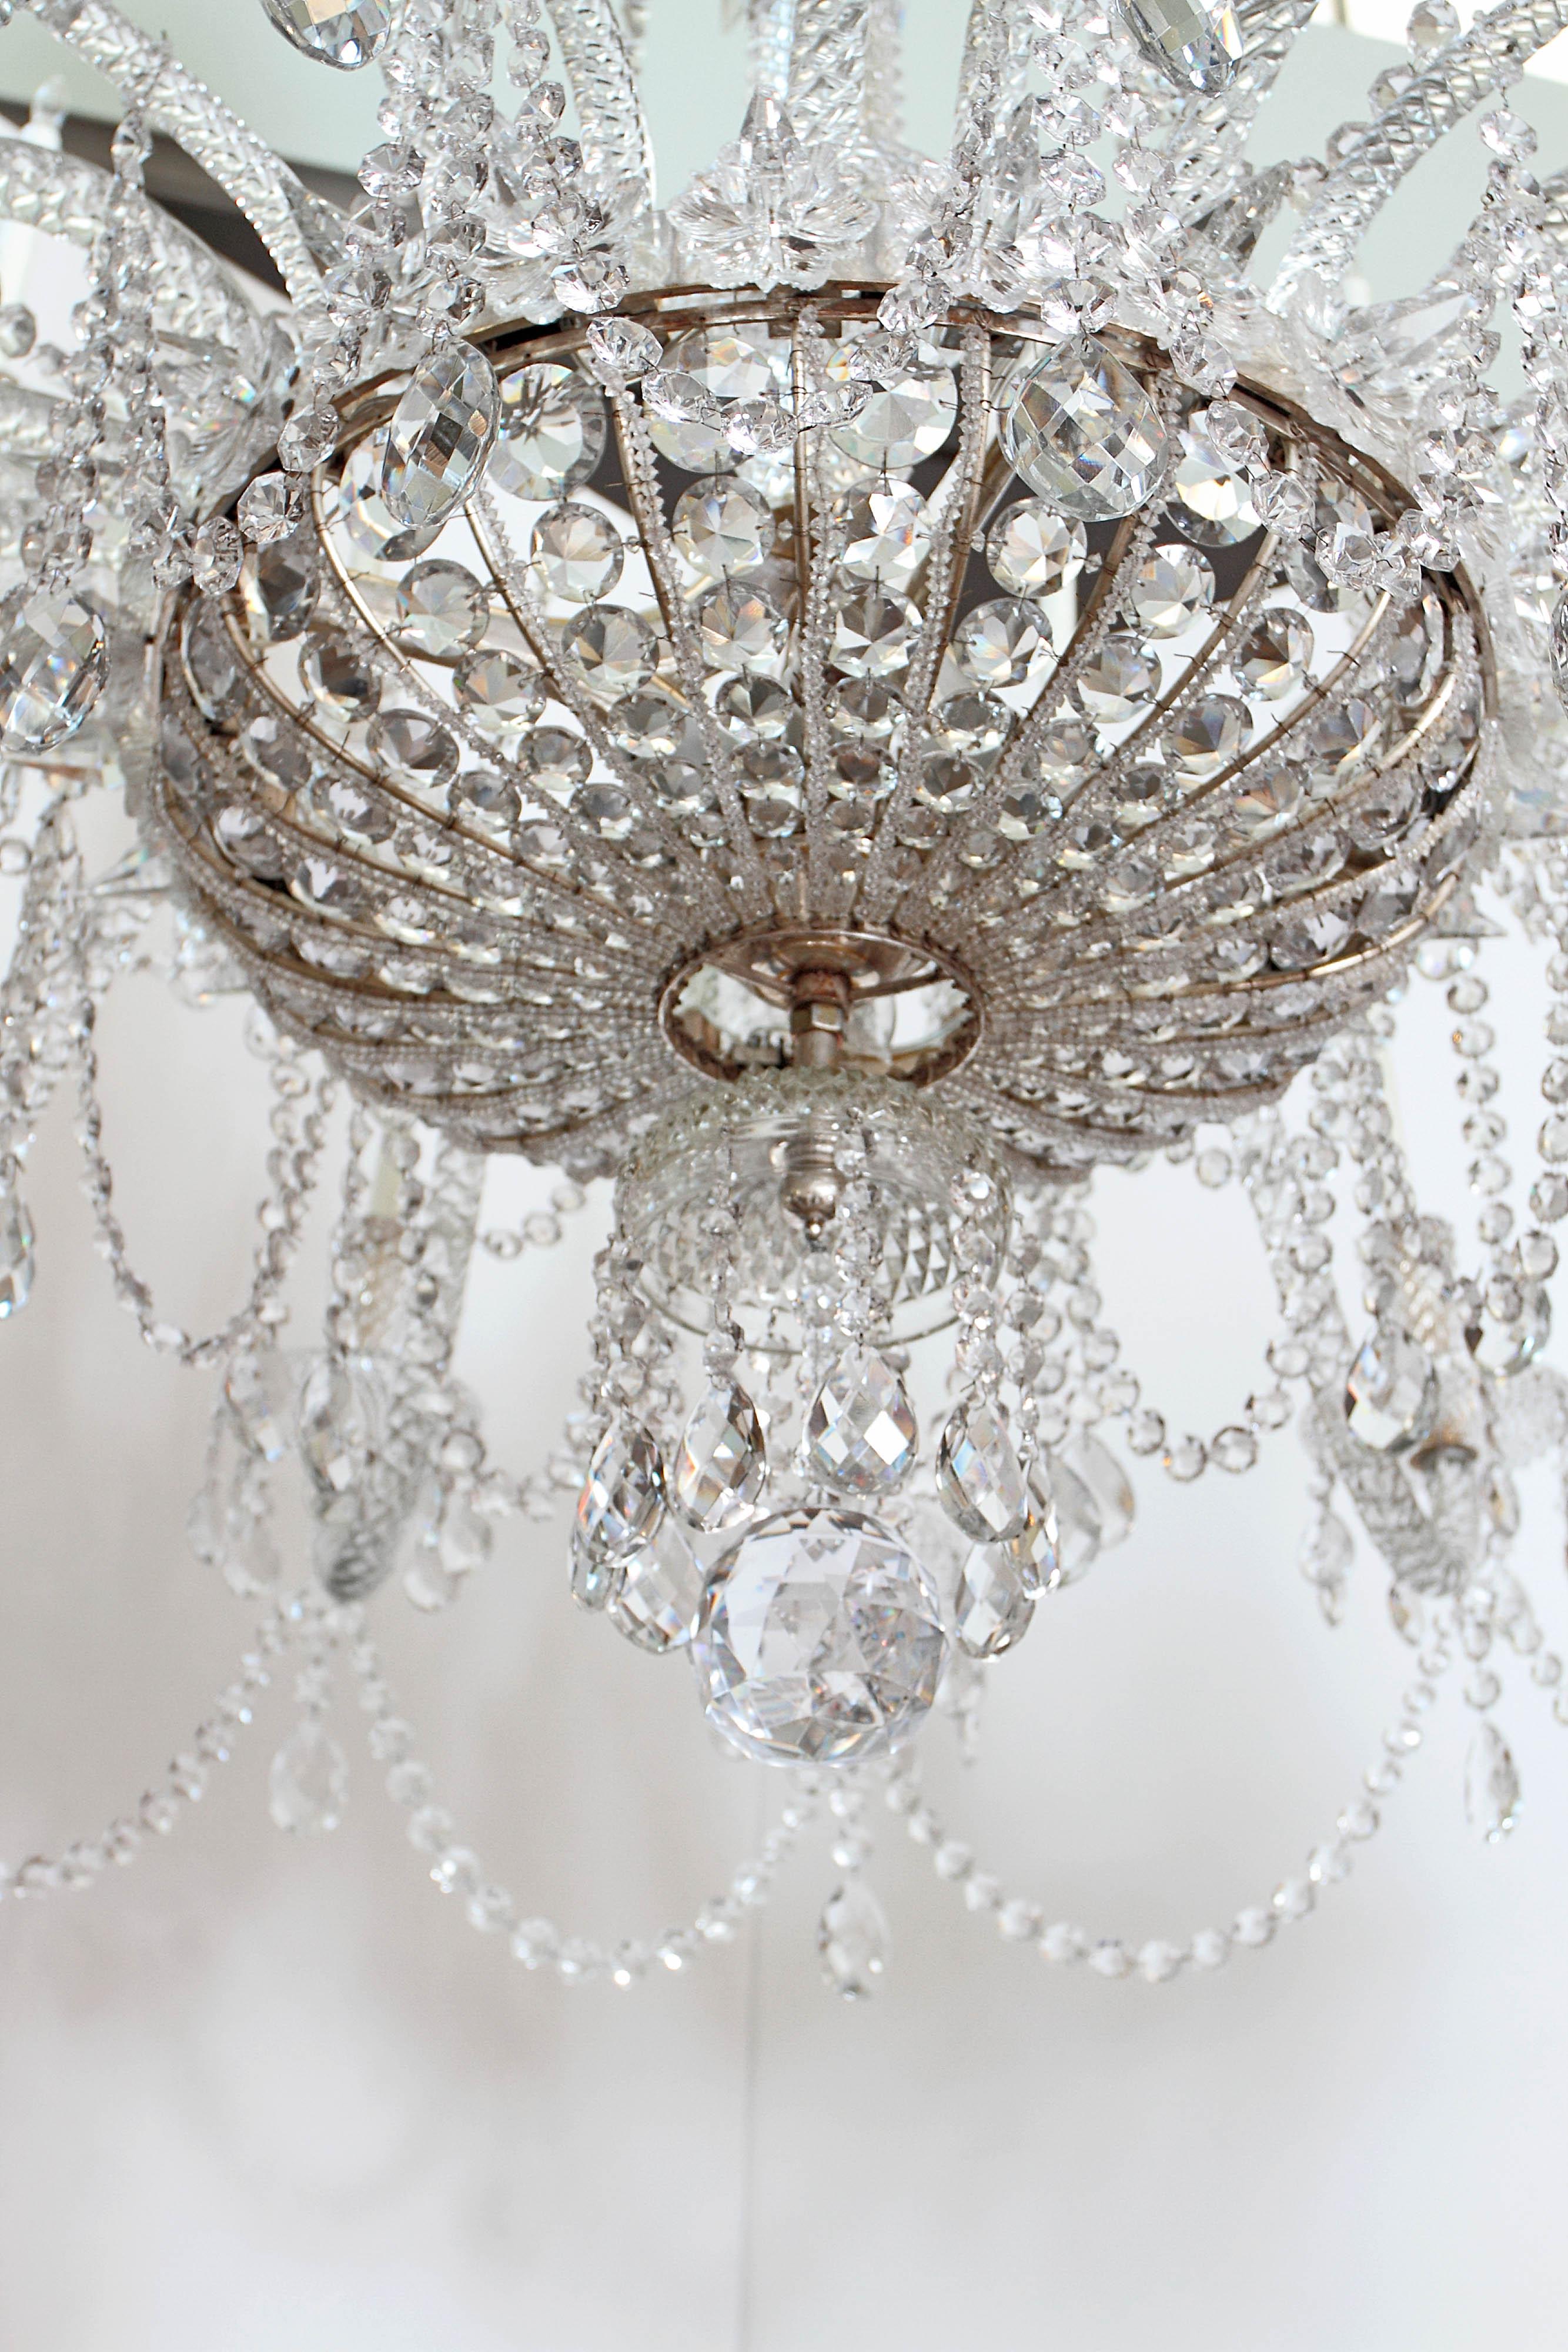 19th Century Pair of Grand Scale Mid-Victorian 24-Light Cut-Crystal Chandeliers For Sale